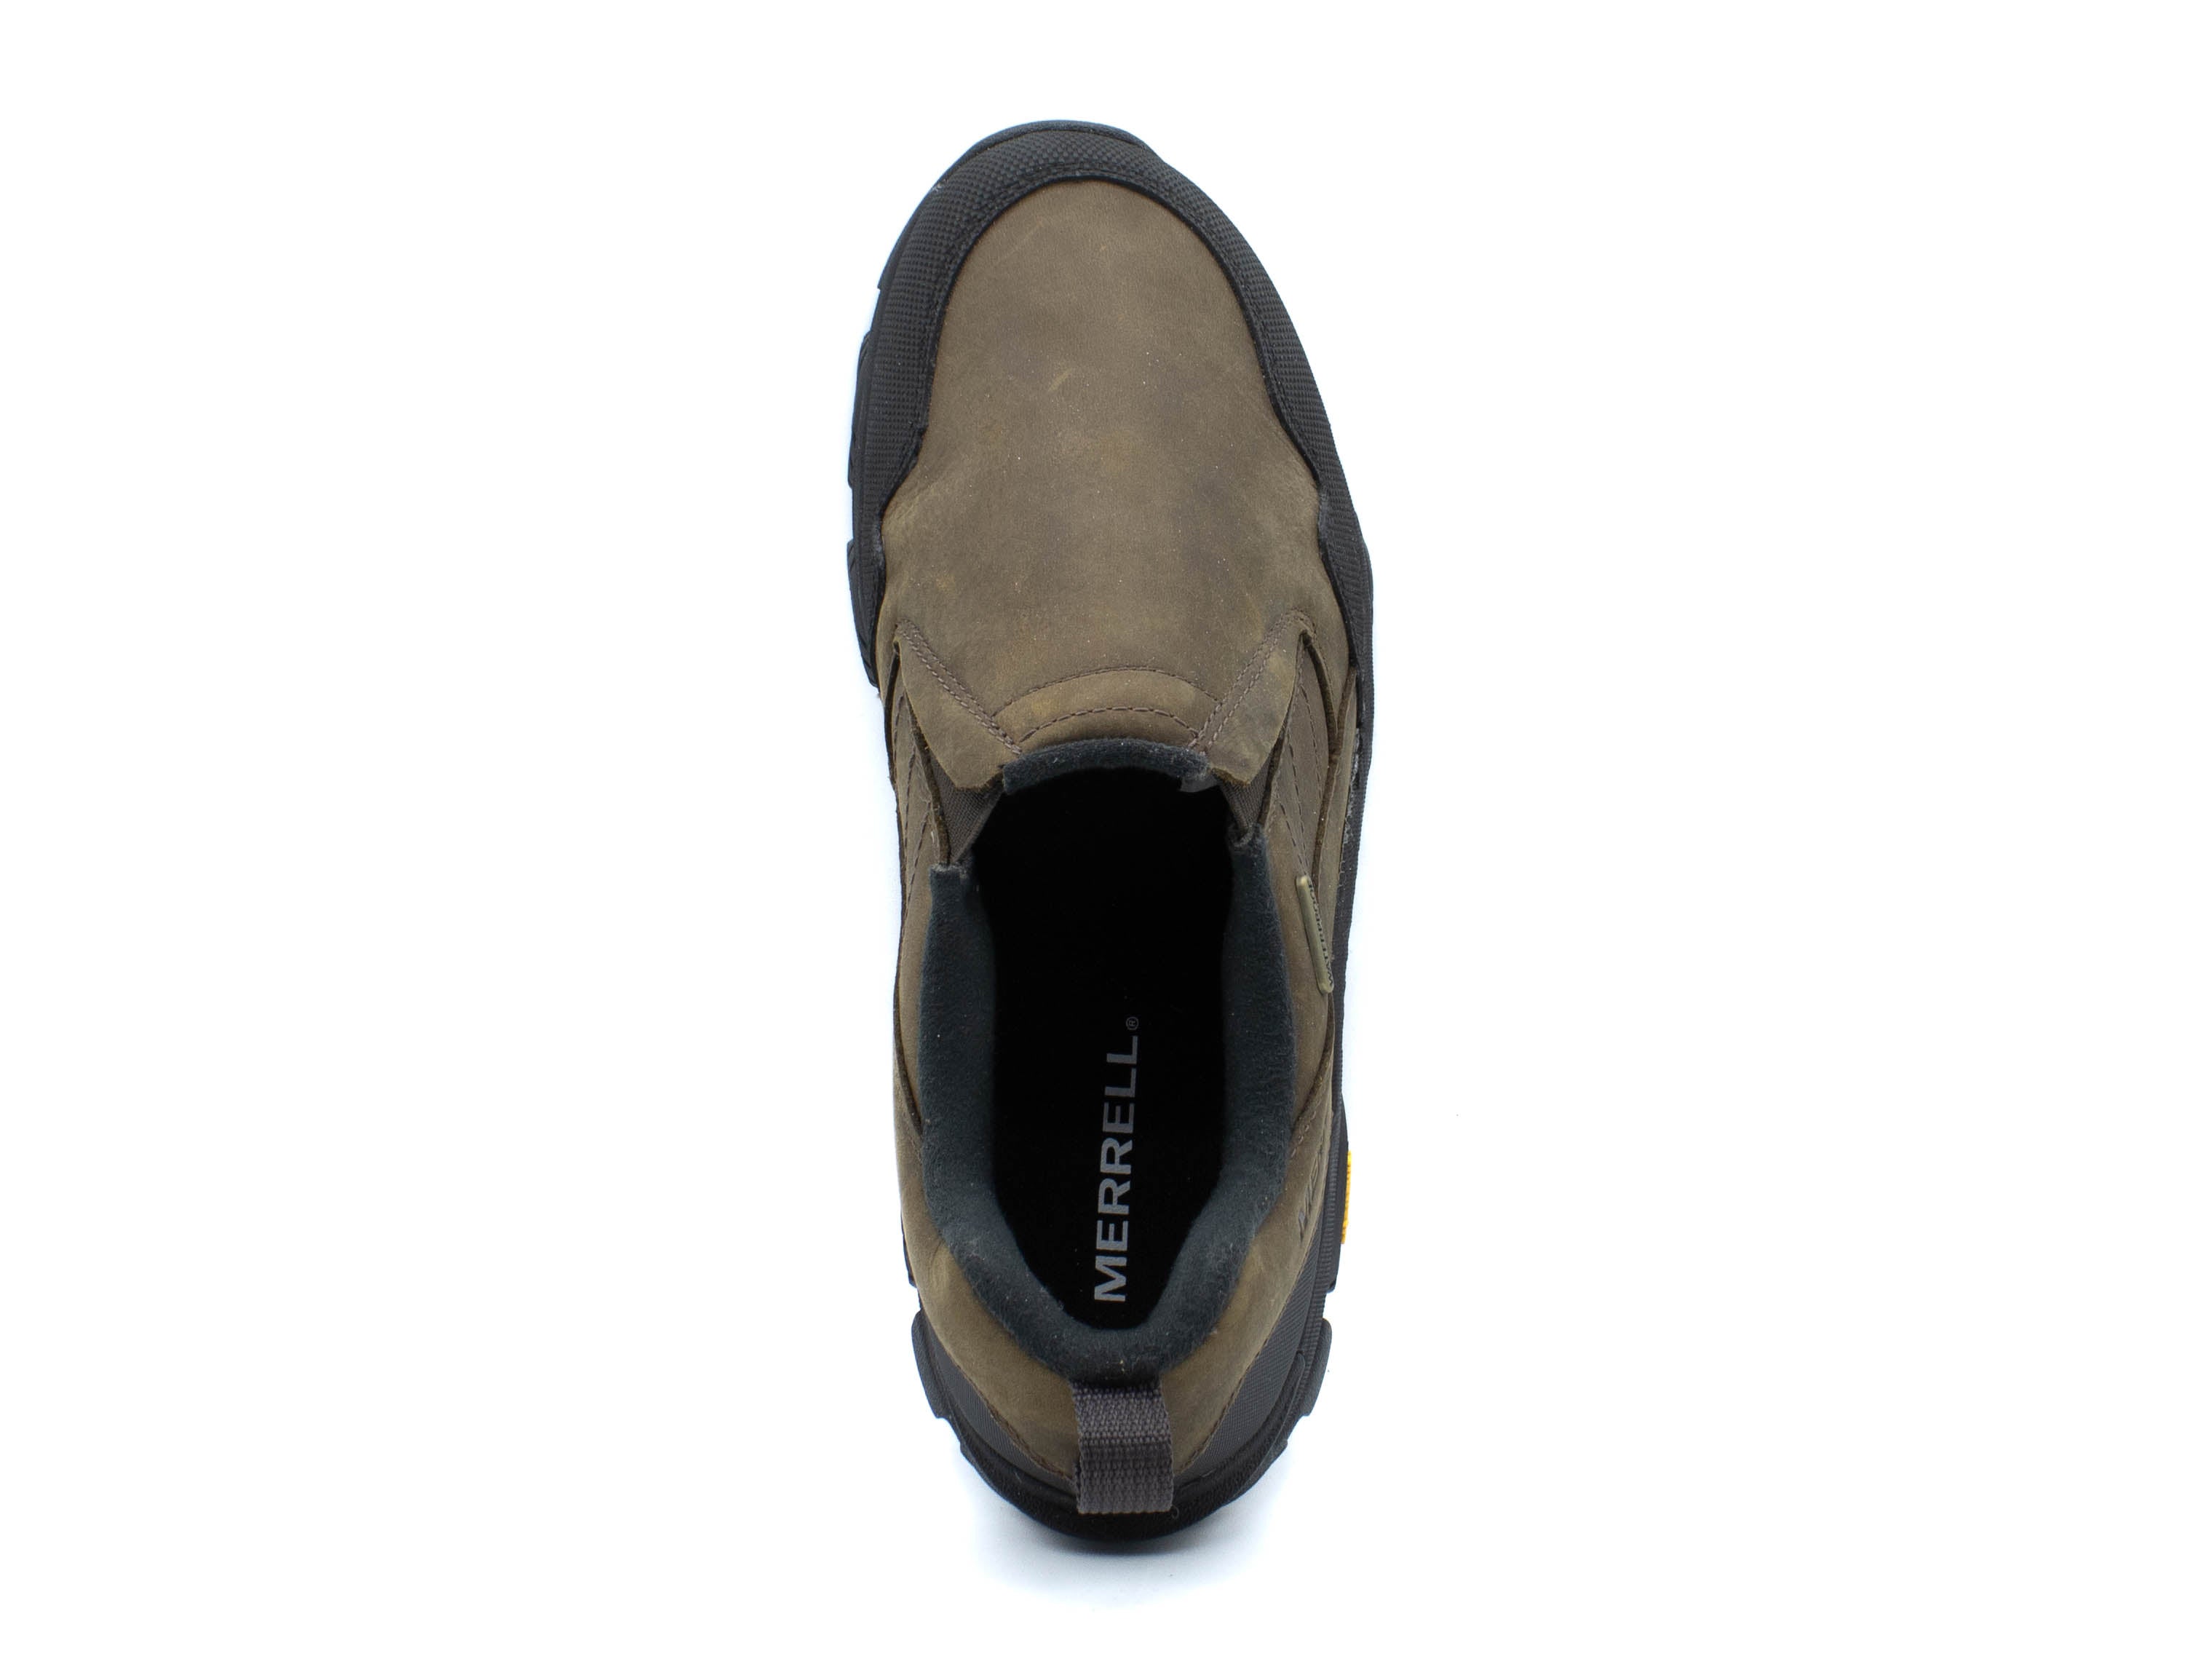 MERRELL Coldpack 3 Thermo Moc WP